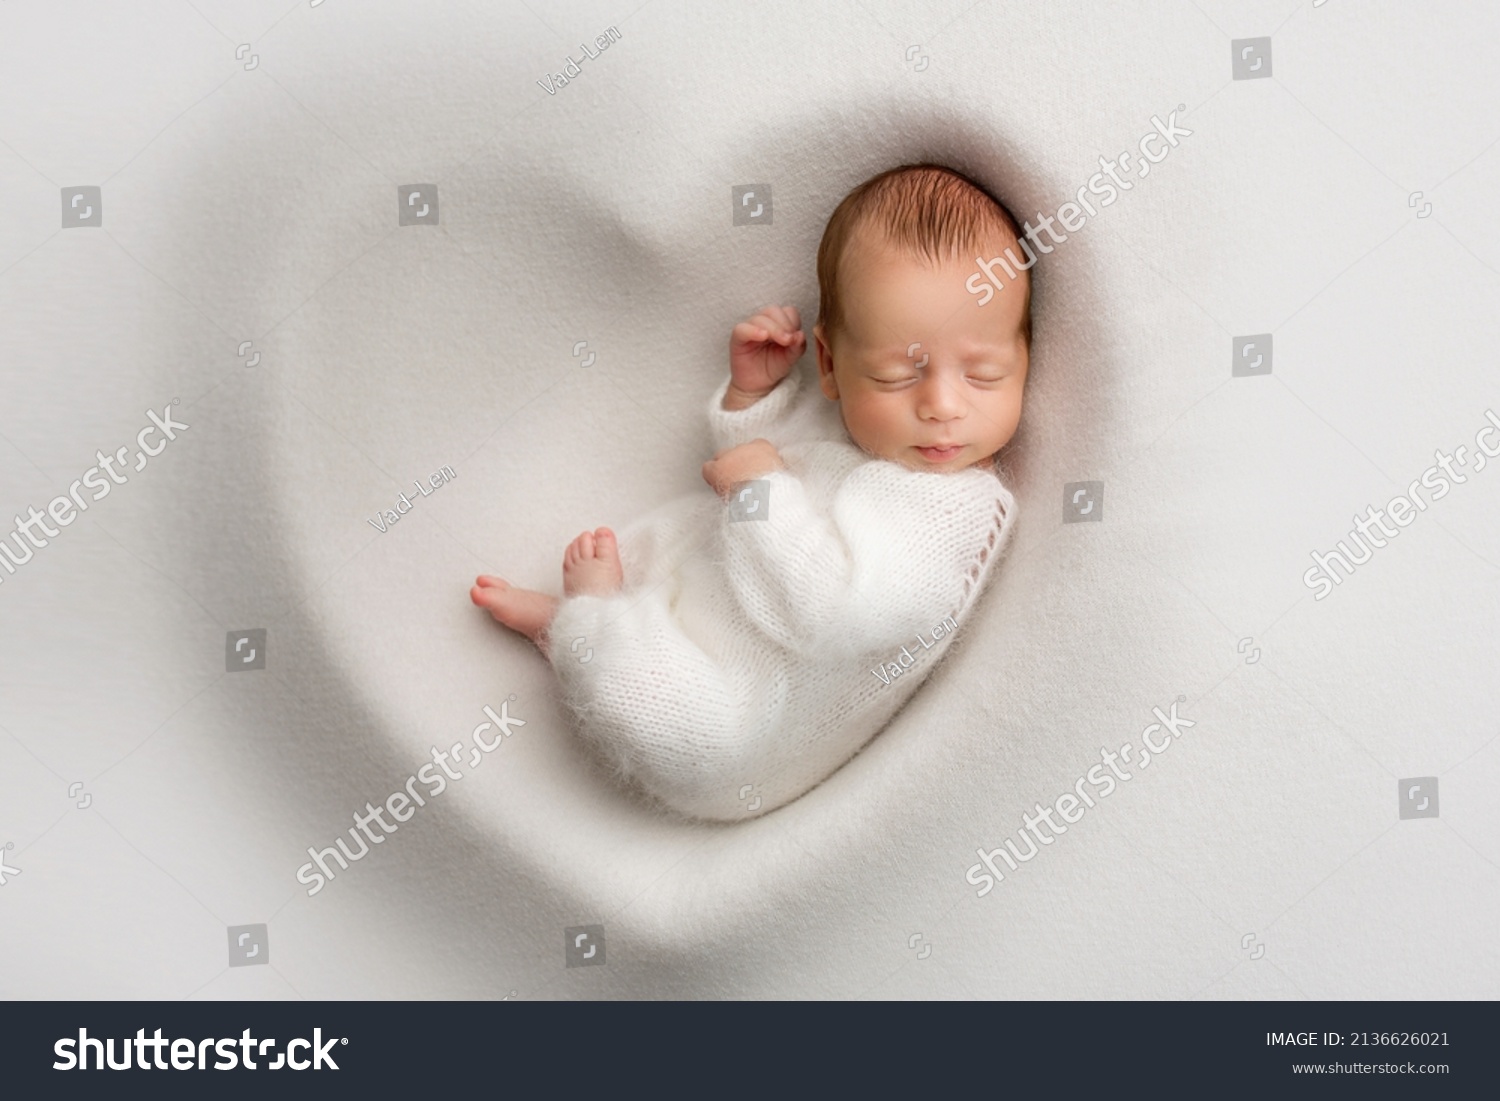 A sleeping newborn boy in the first days of life in a white soft cocoon with a knitted woolen white hat on a white background in the shape of a heart. Studio macro photography, portrait of a newborn. #2136626021